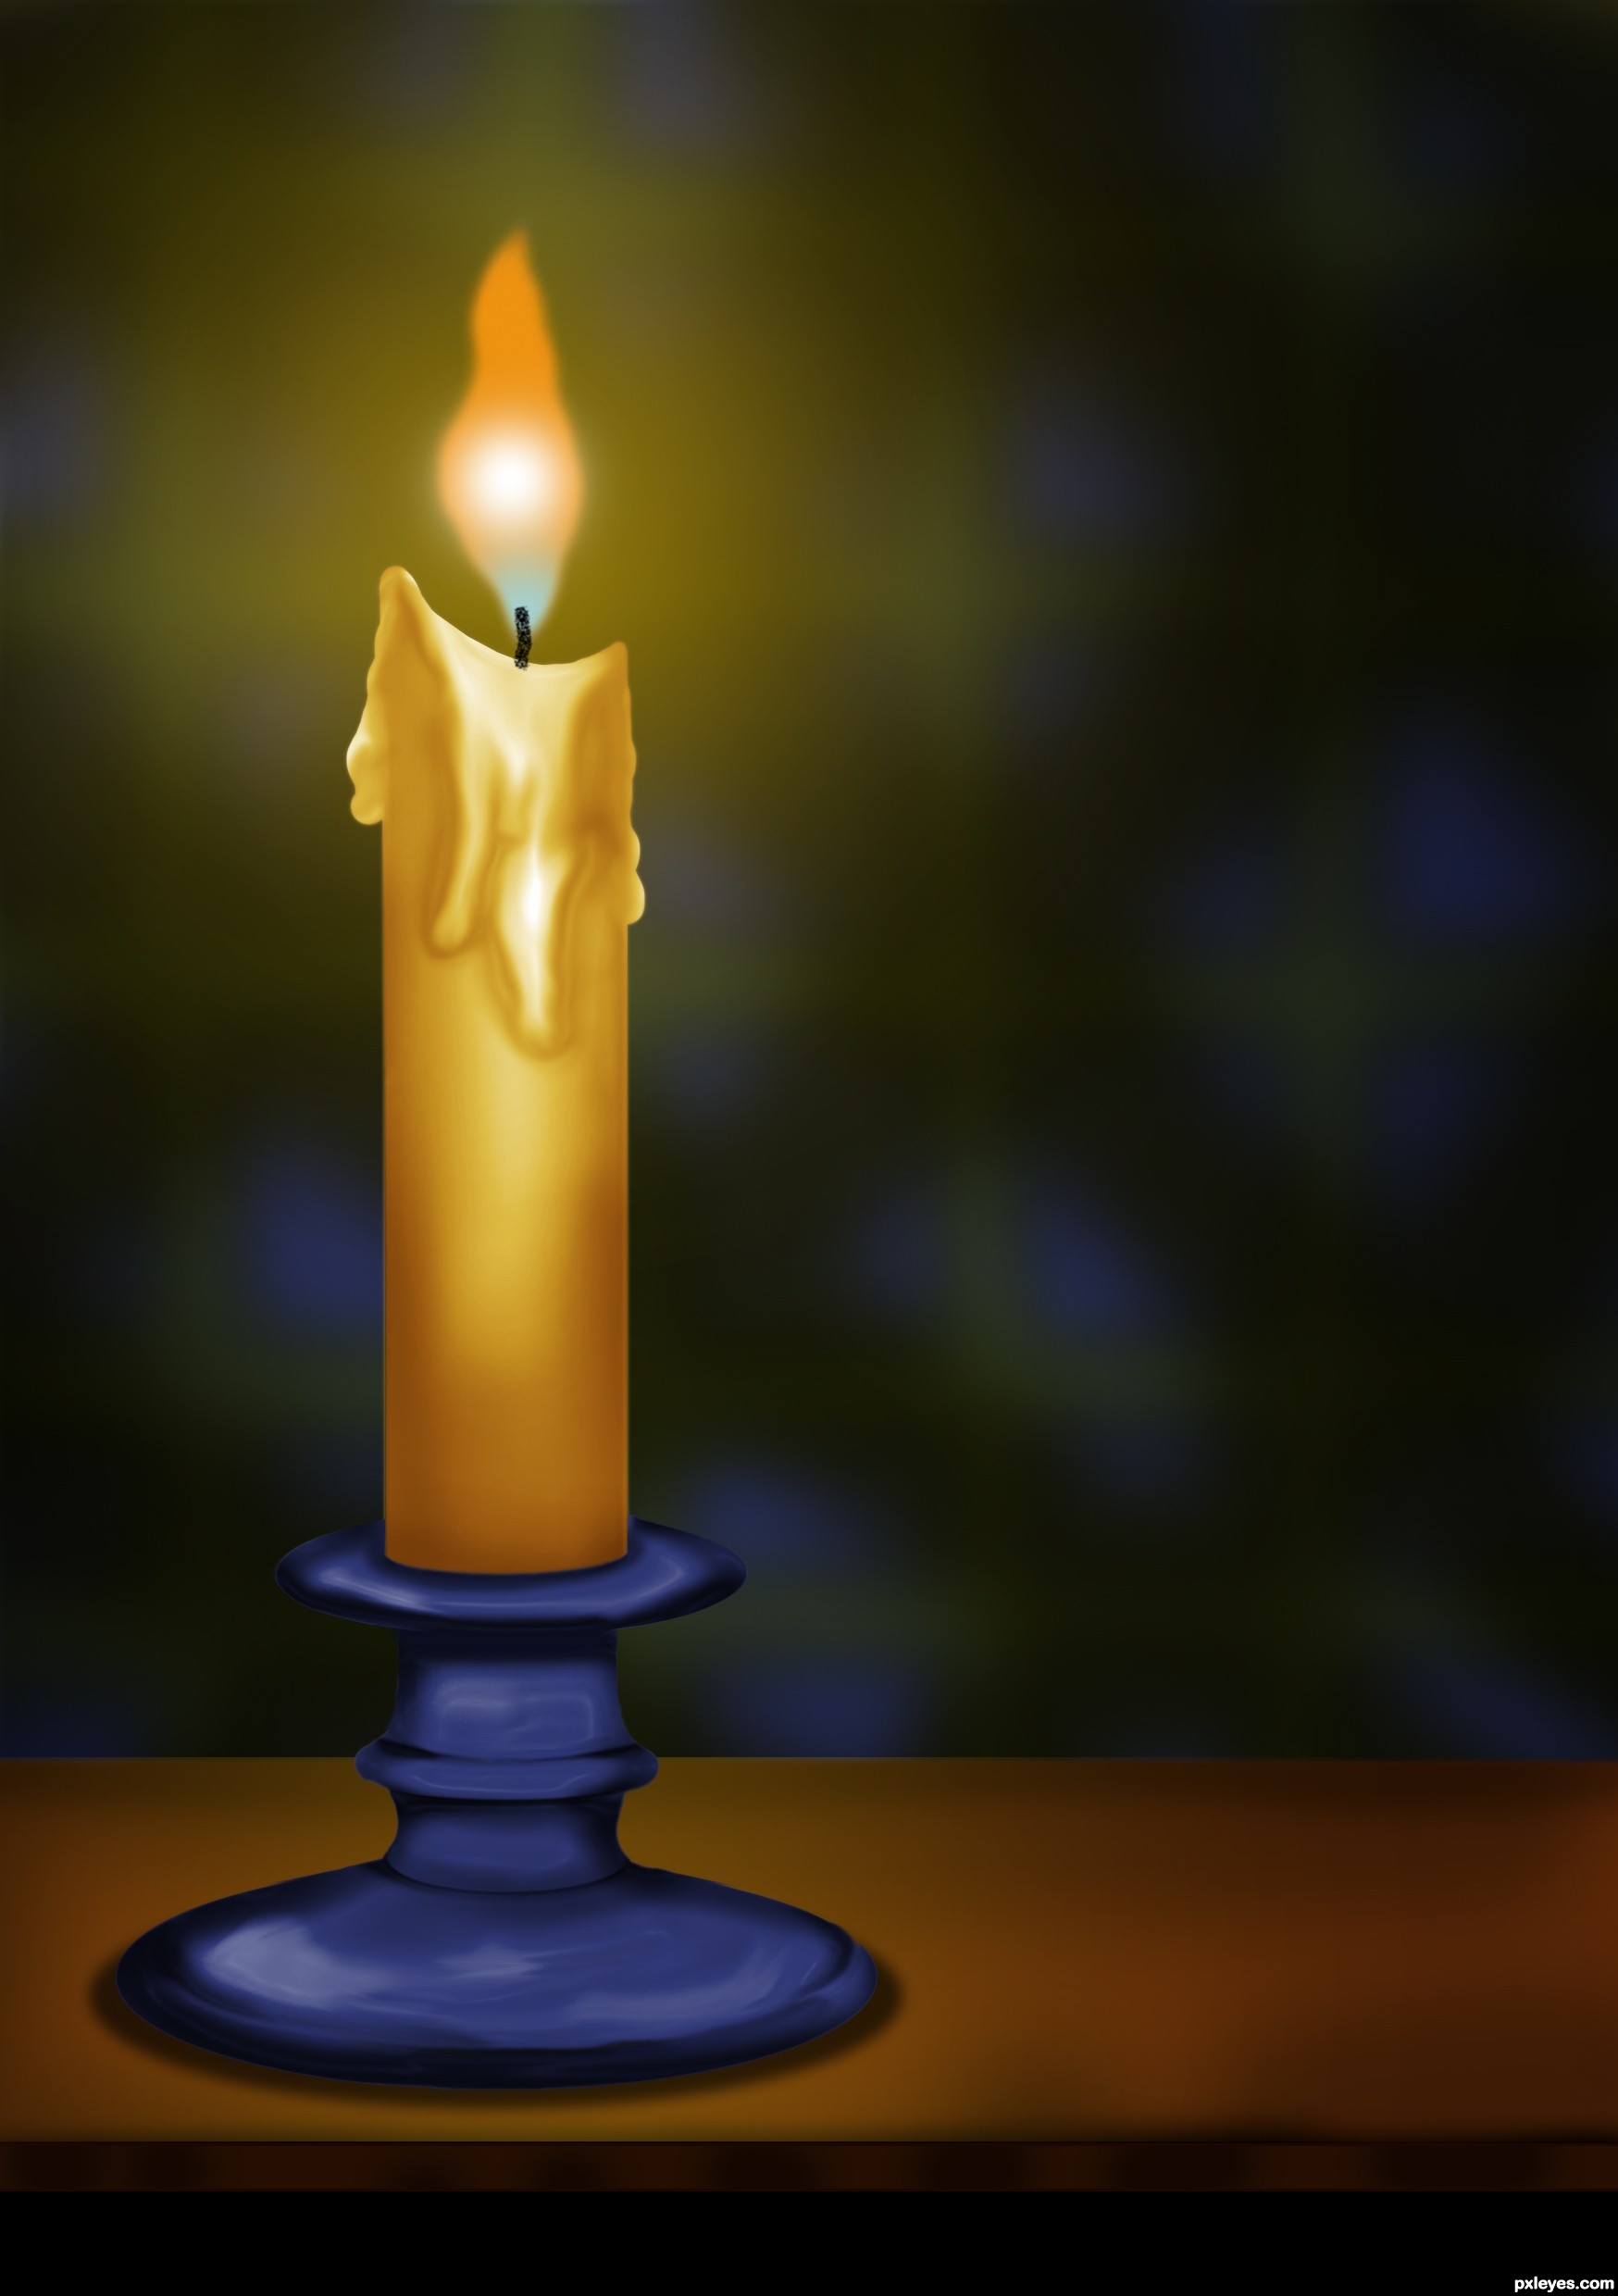 burning candle picture, by friiskiwi for: realistic fire drawing ...